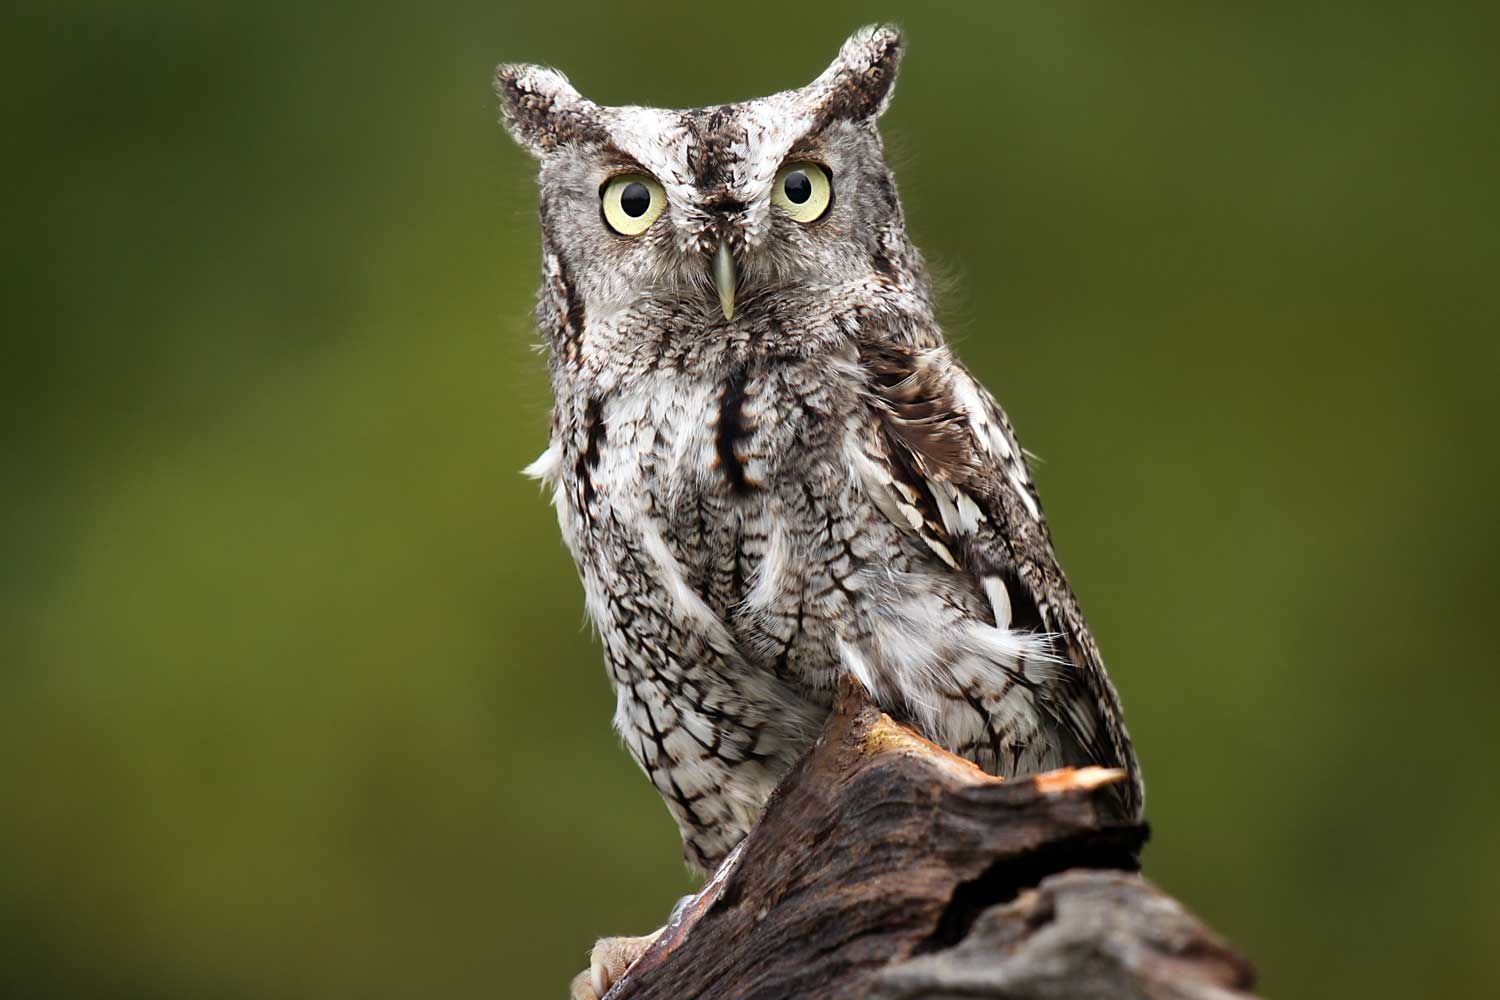 Eastern screech owl perched on a branch.